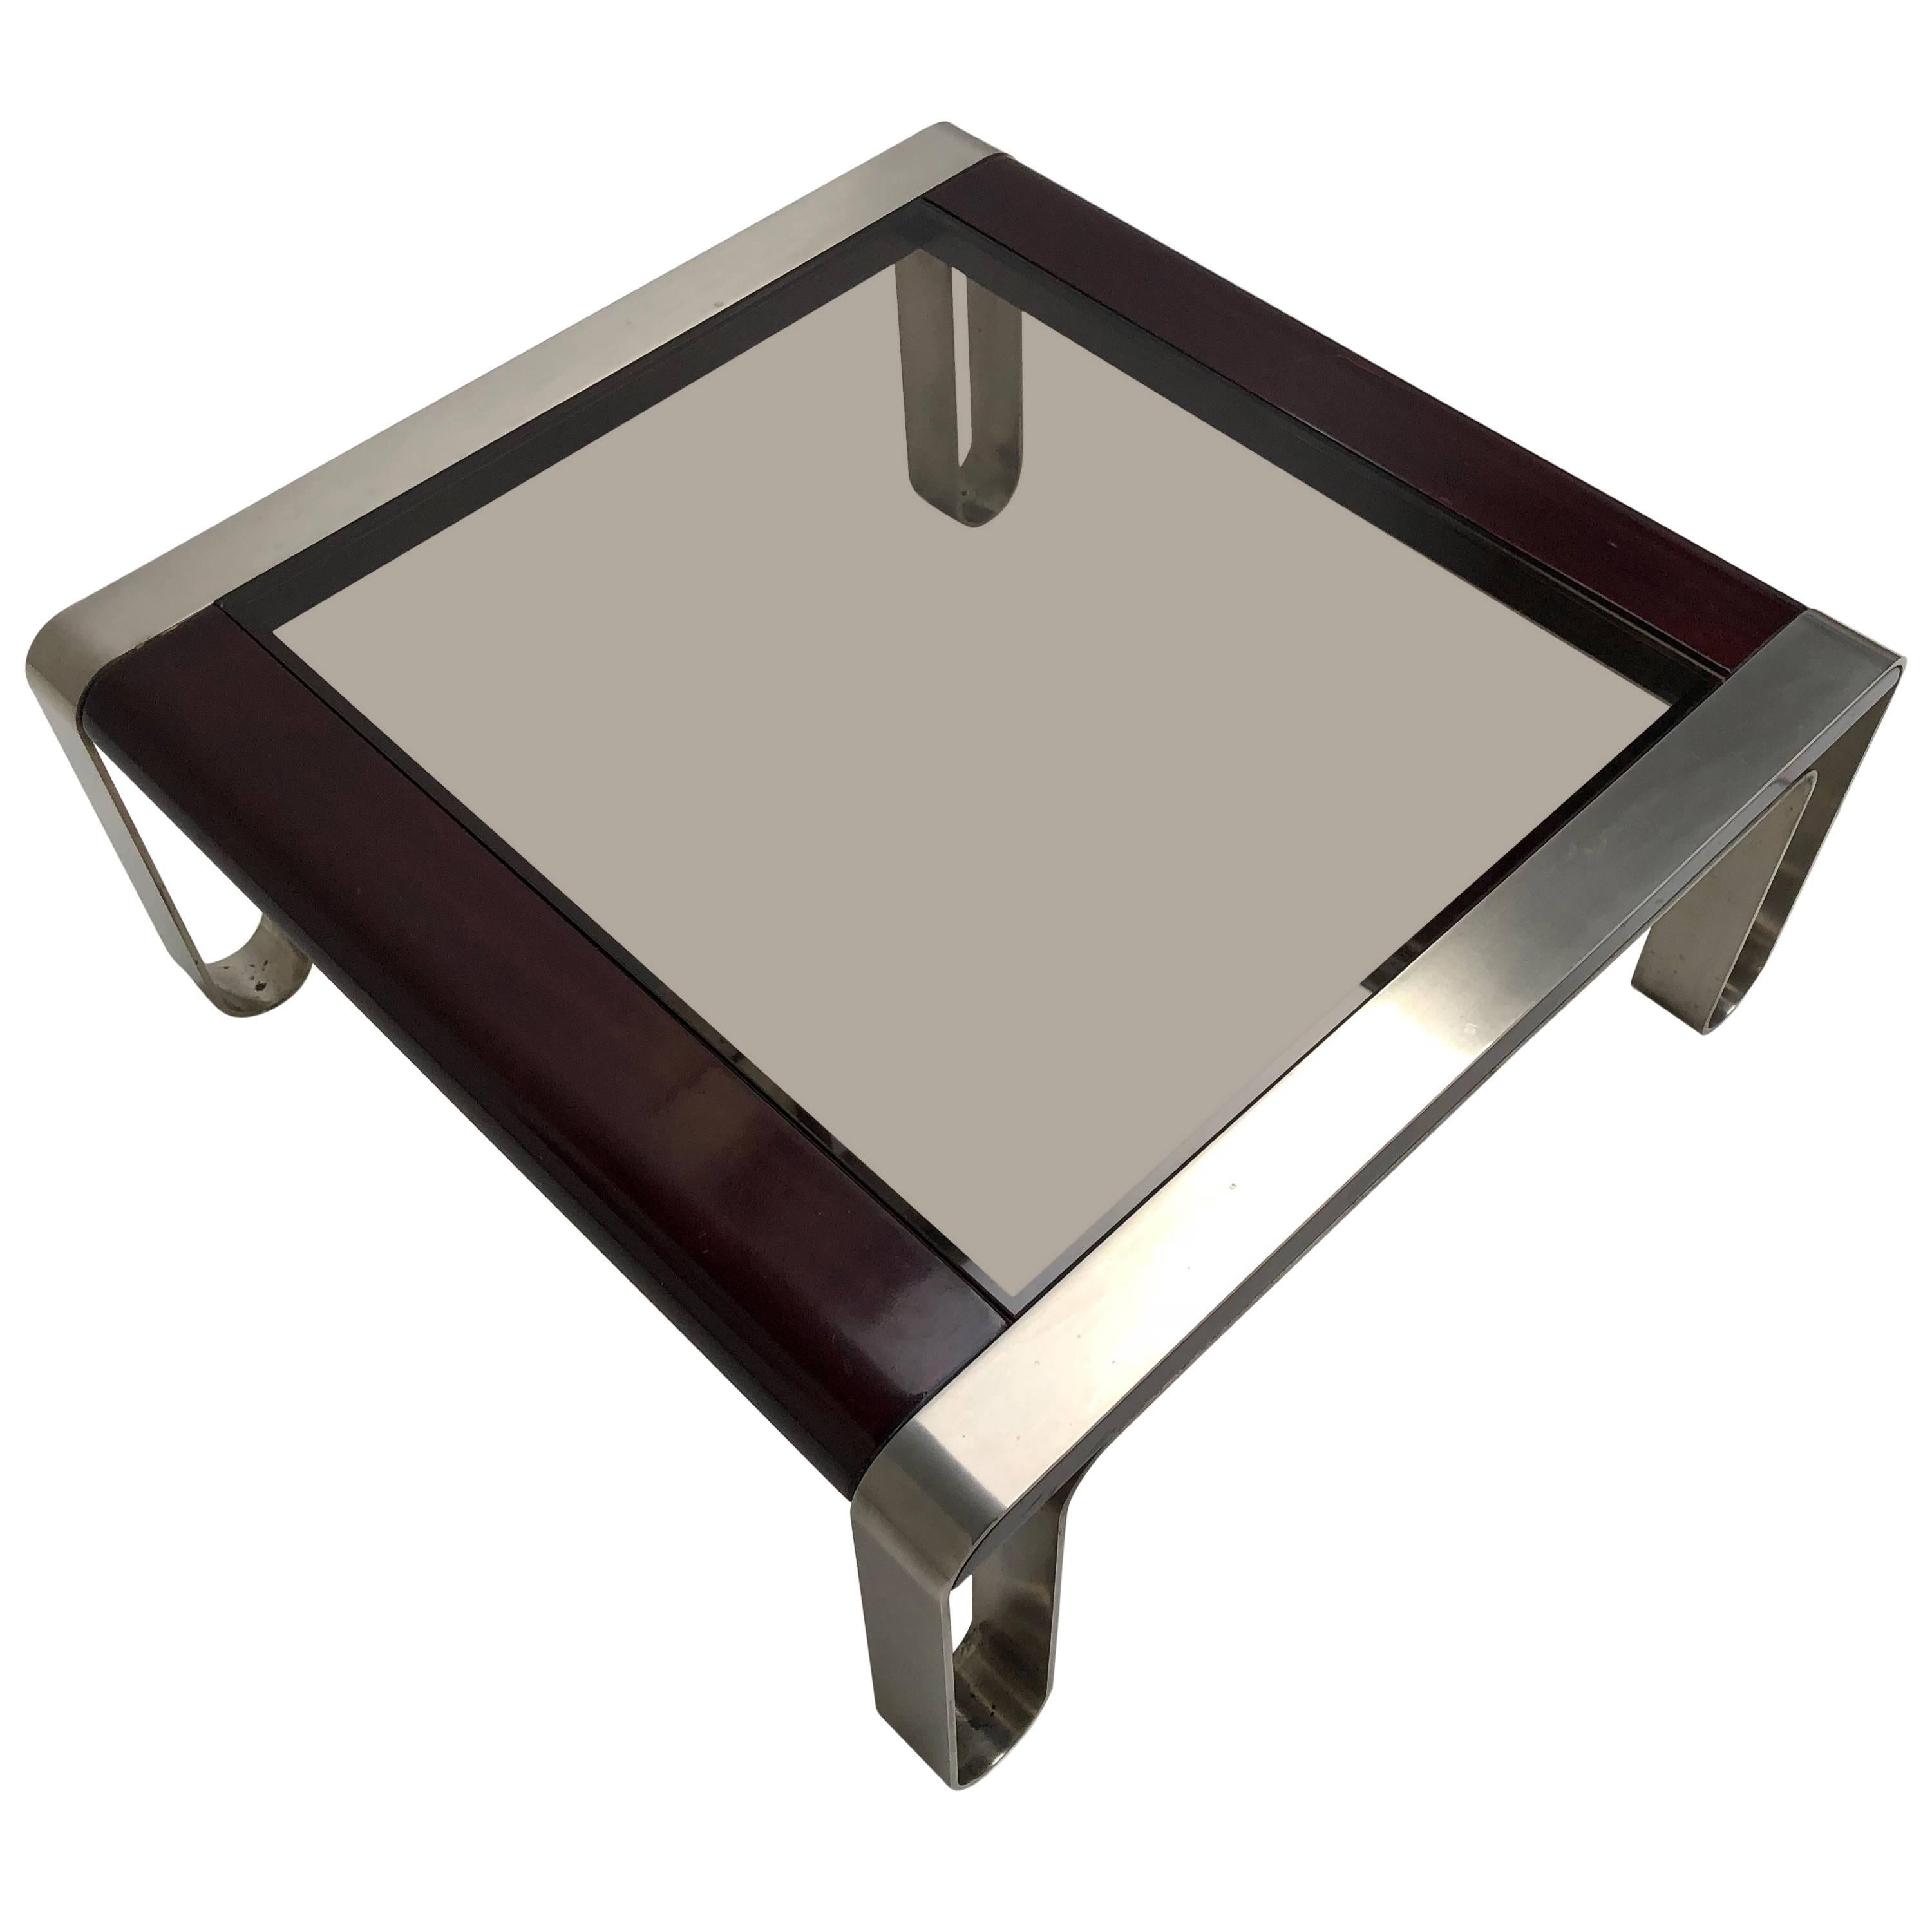 Italian, 1970s Sculptural Coffee or Side Table Nickel-Plated Steel, Wood & Glass For Sale